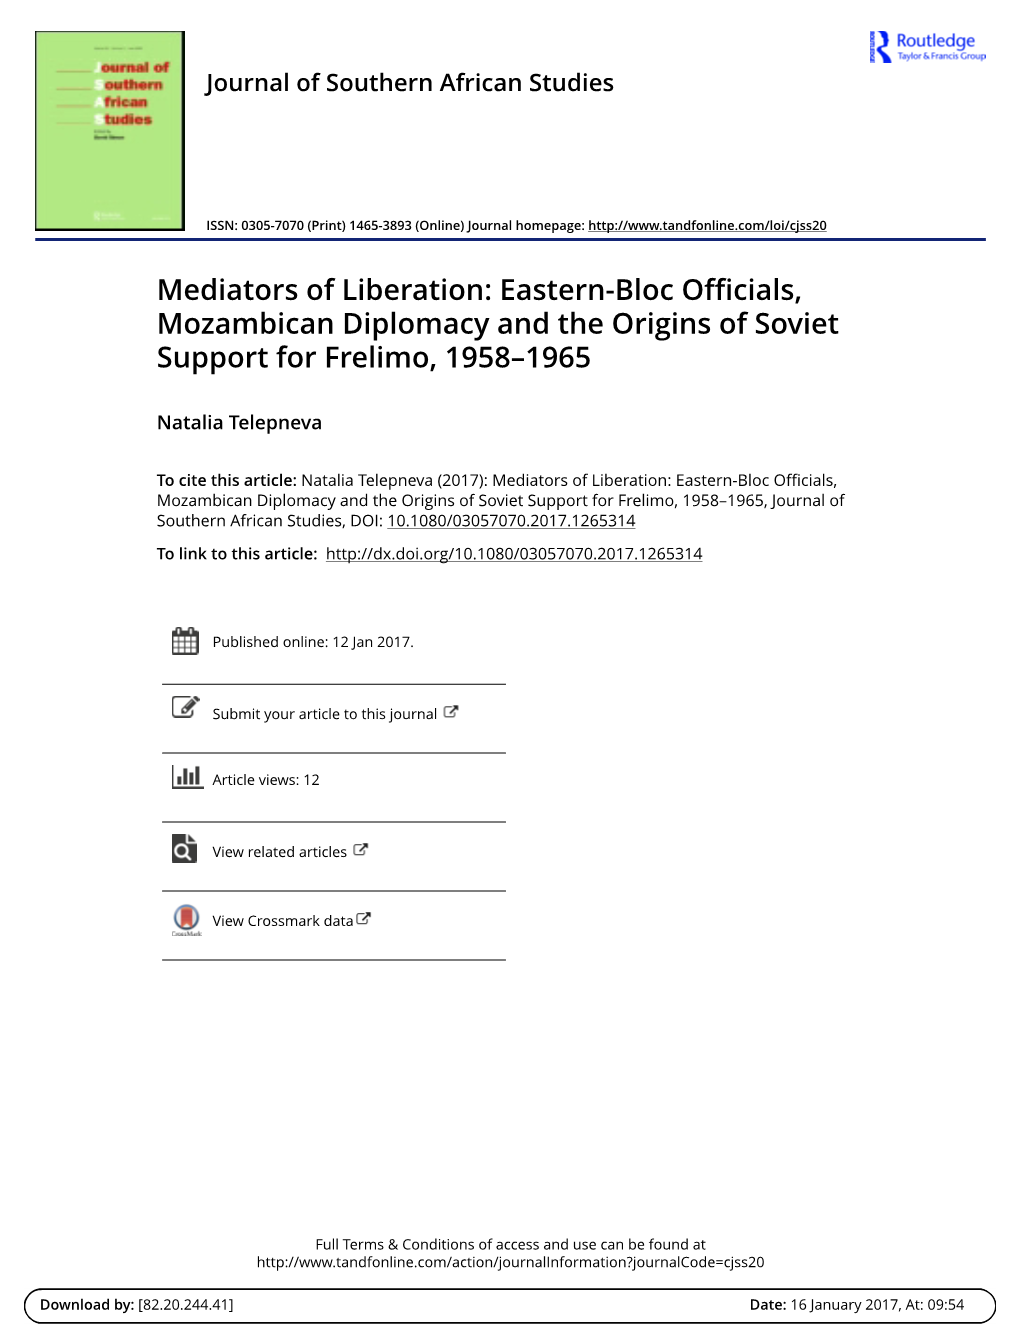 Mediators of Liberation: Eastern-Bloc Officials, Mozambican Diplomacy and the Origins of Soviet Support for Frelimo, 1958–1965